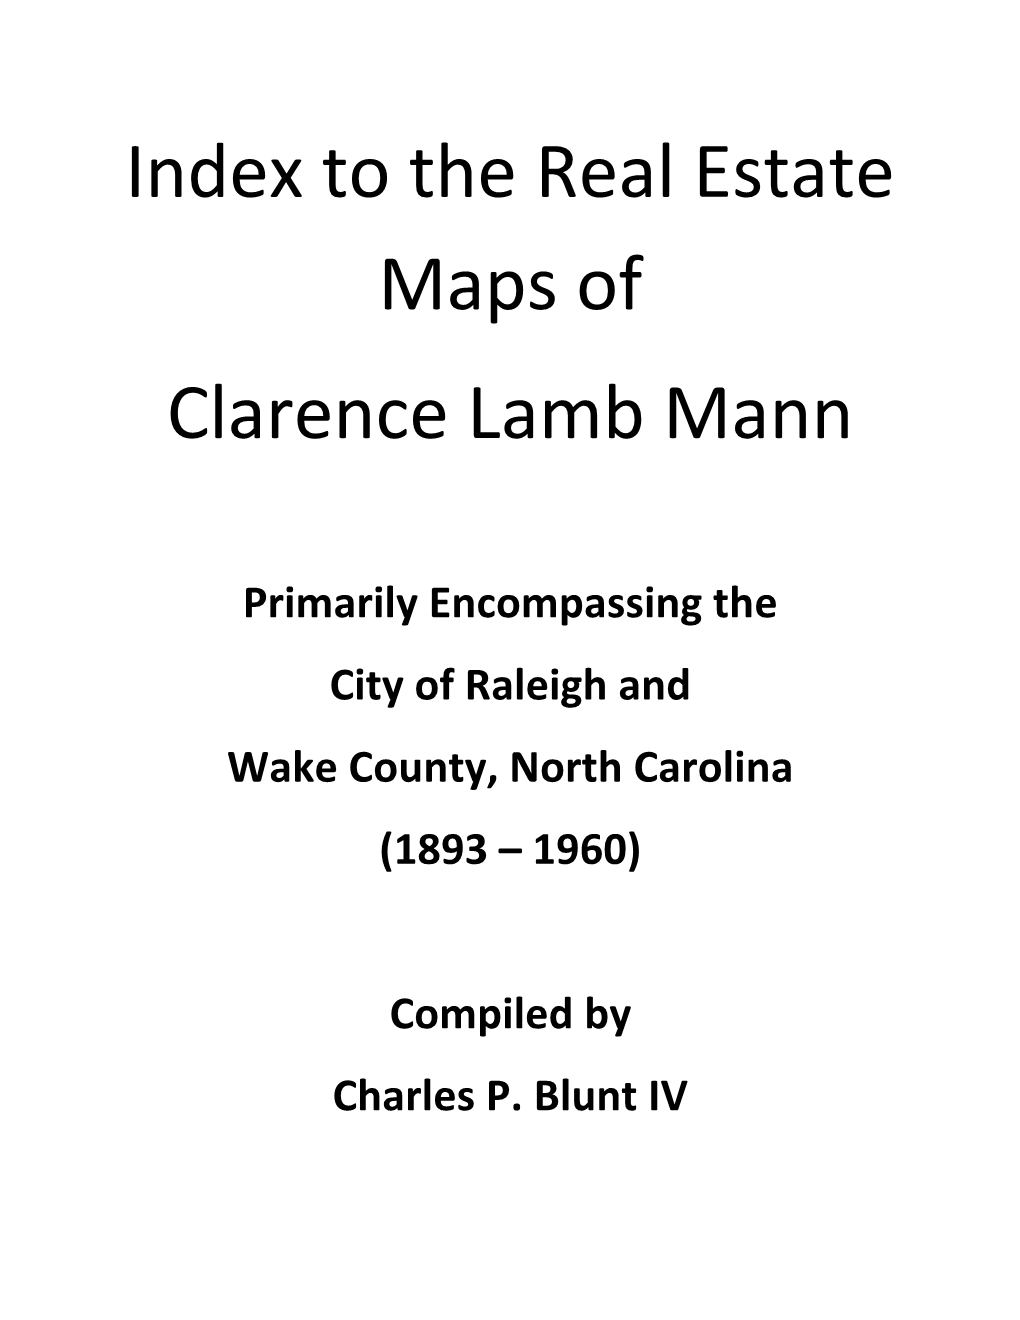 To the Real Estate Maps of Clarence Lamb Mann